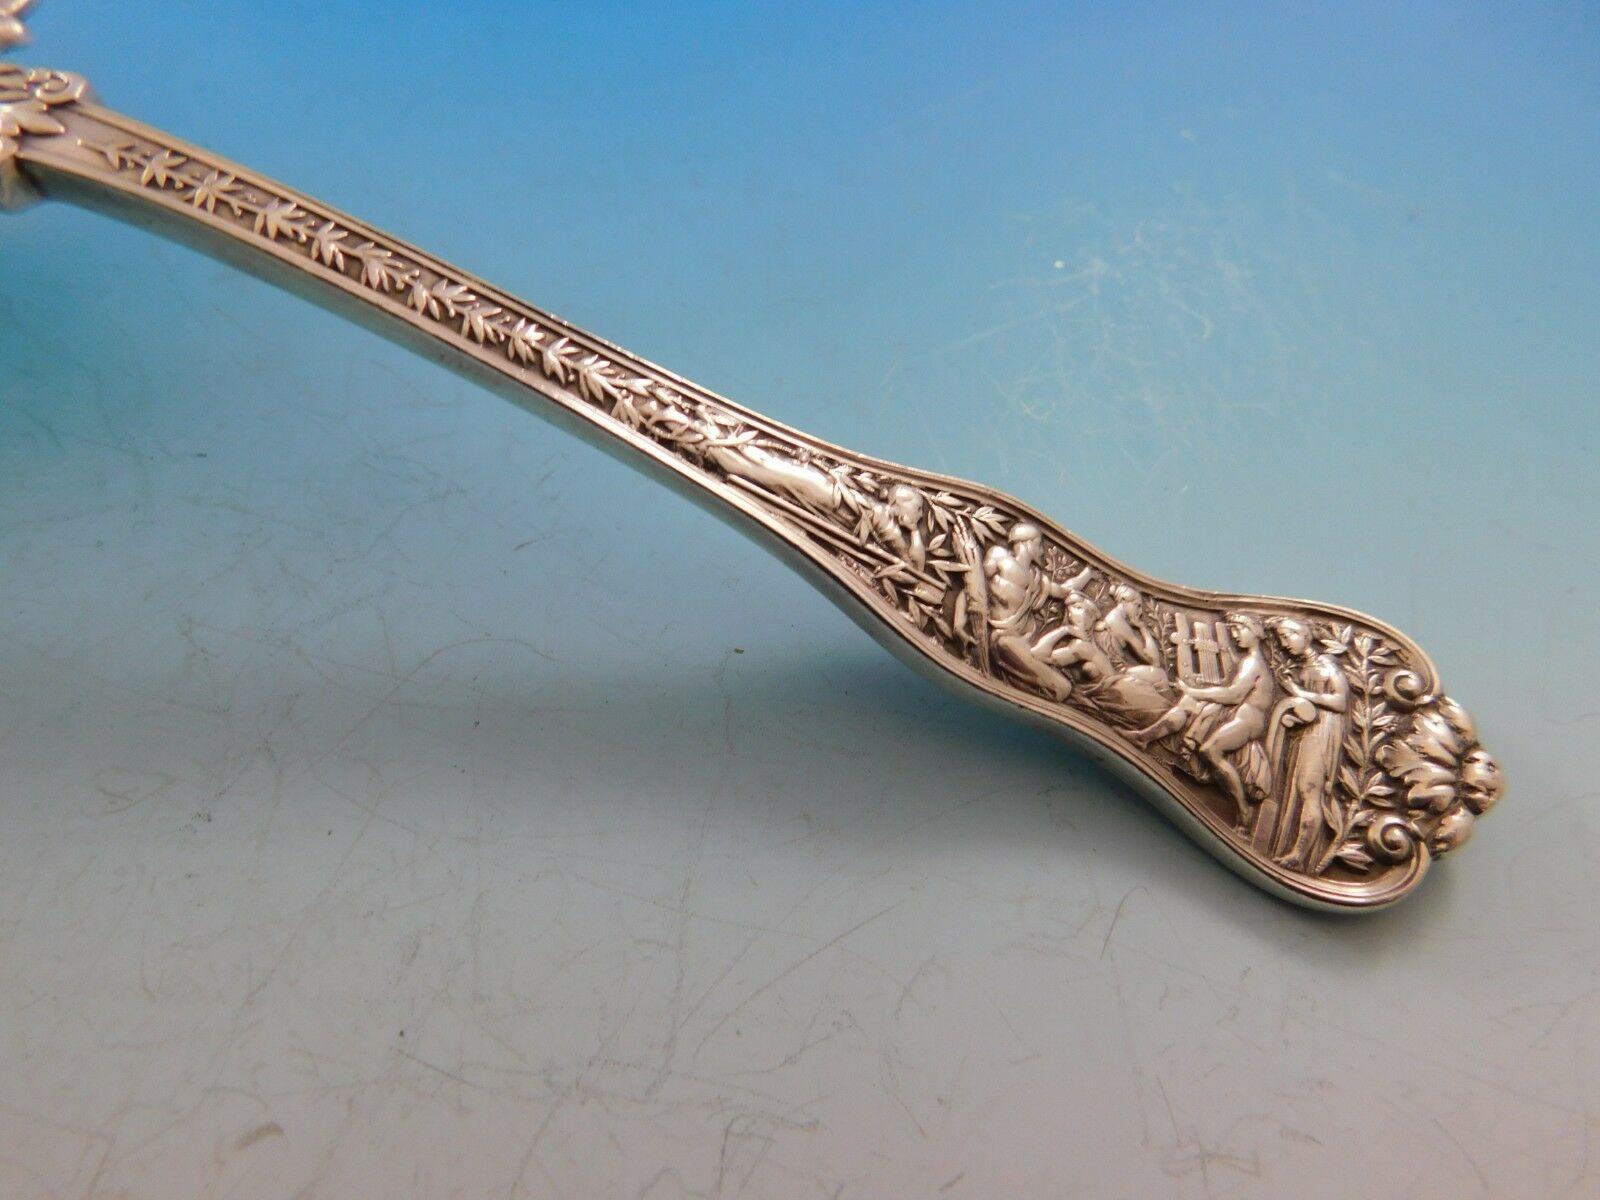 Stunning sterling silver Saratoga chip server in the pattern Olympian by Tiffany and Co. The handle of this piece features the fifth motif in this pattern, which is Orpheus, in search of his wife Eurydice, charming all those around him with the